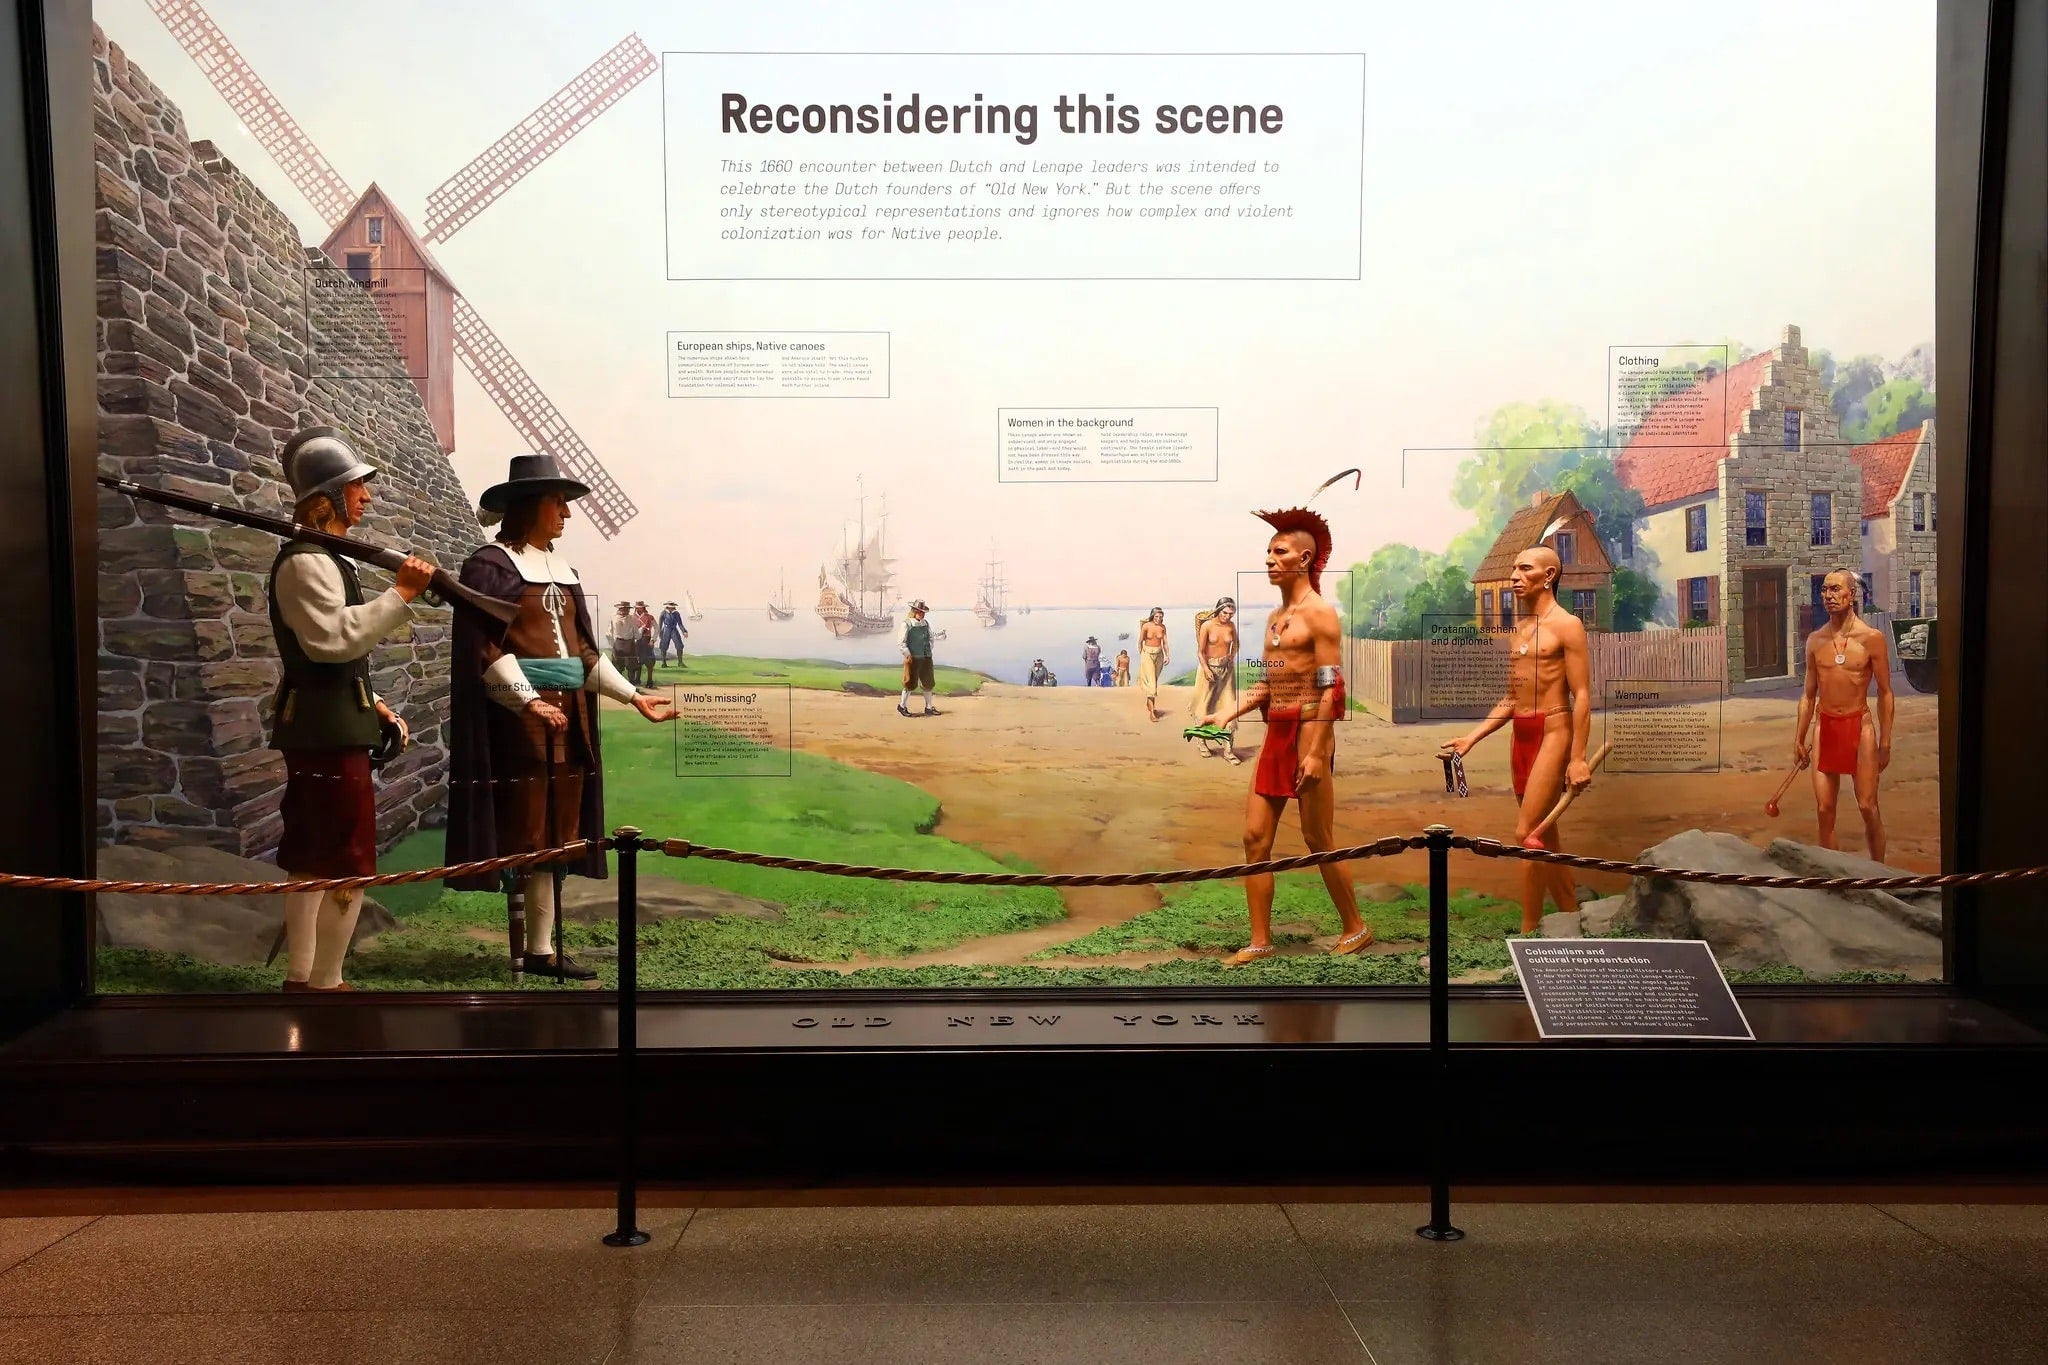 Museum of Natural History New York City Reconsidering the Scene Indians Native Americans Dutch Lenape Colonization